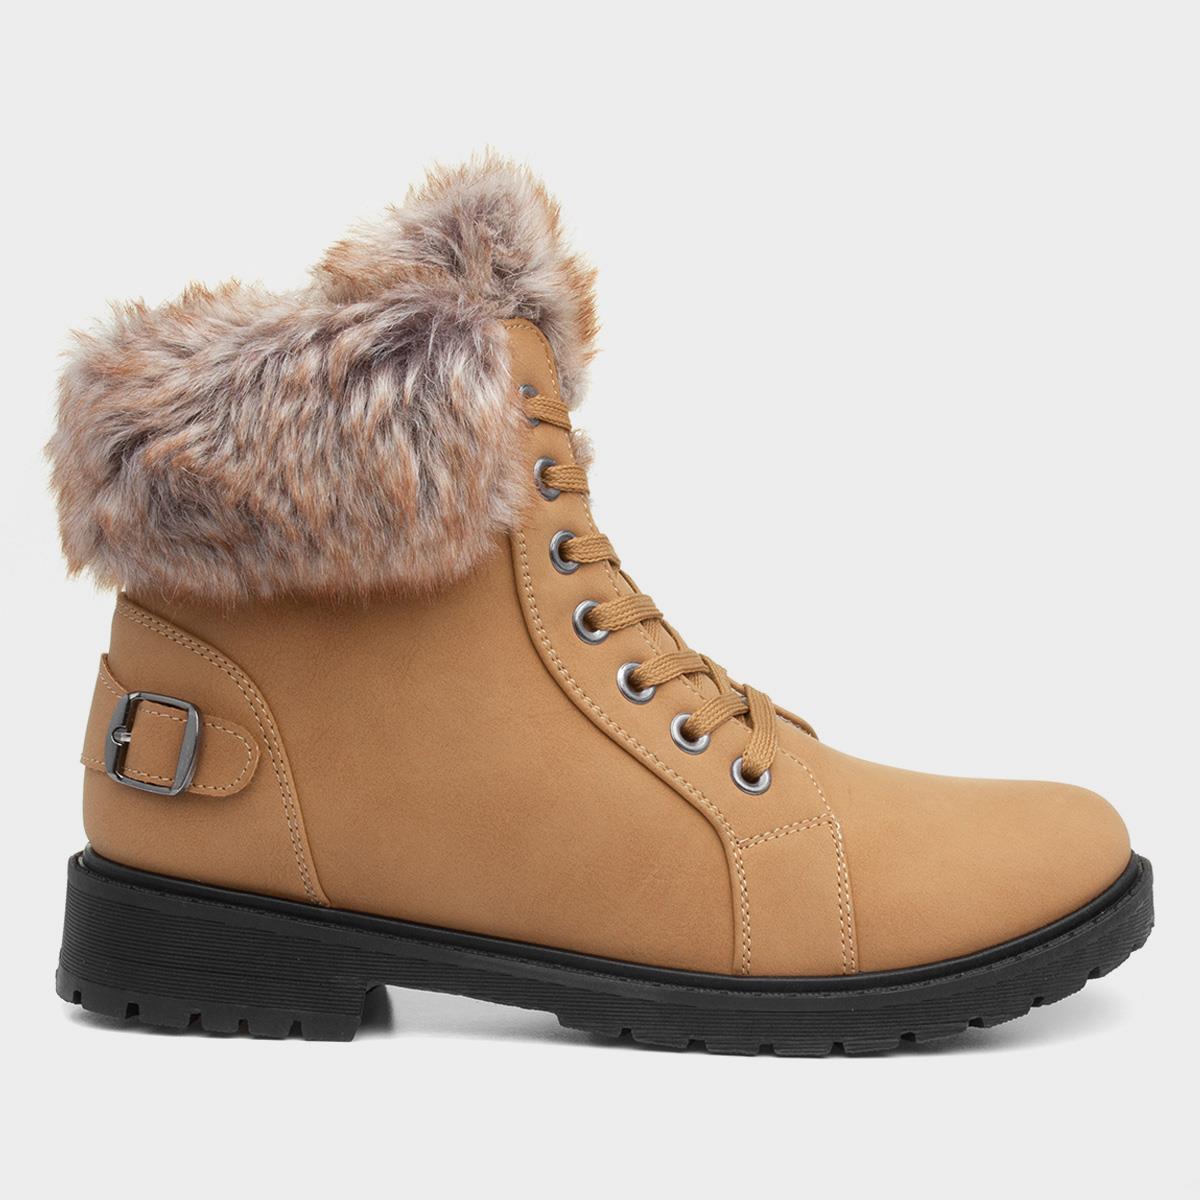 Lilley Womens Tan Lace Up Boot With Faux Fur-180002 | Shoe Zone